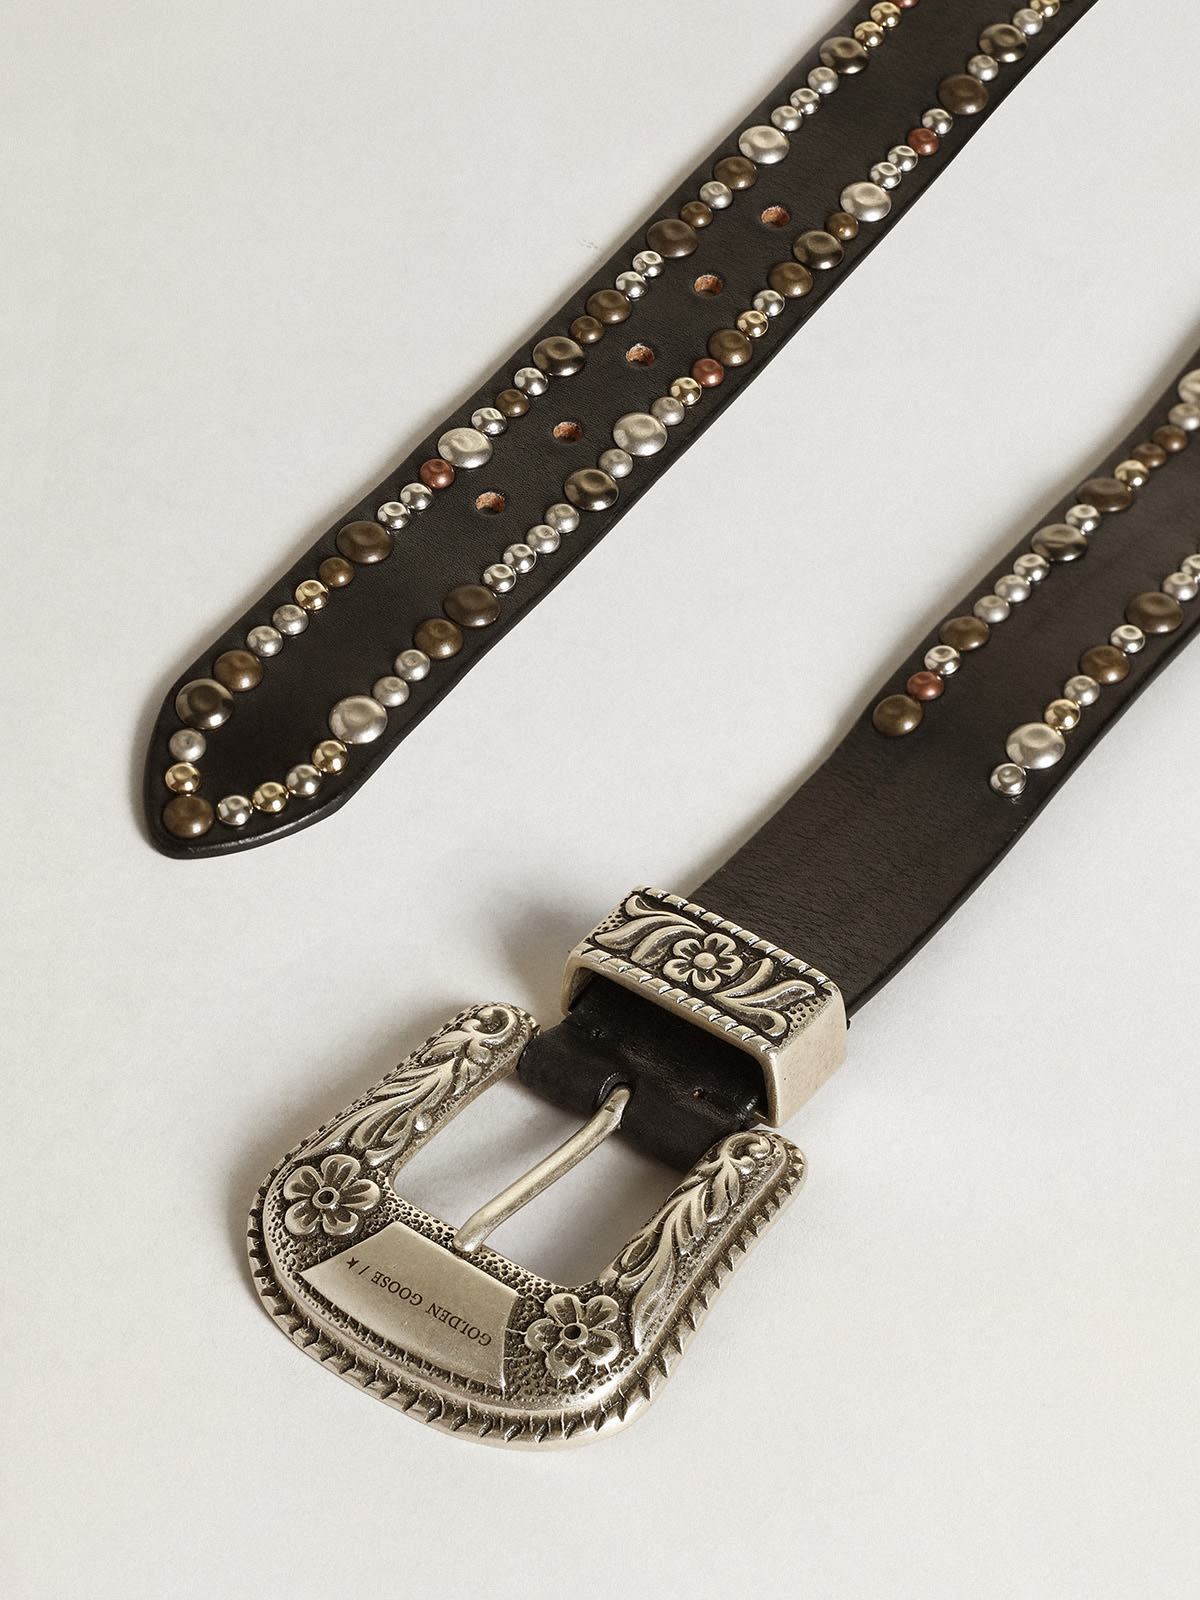 Golden Goose - Women's belt in black leather with studs in 